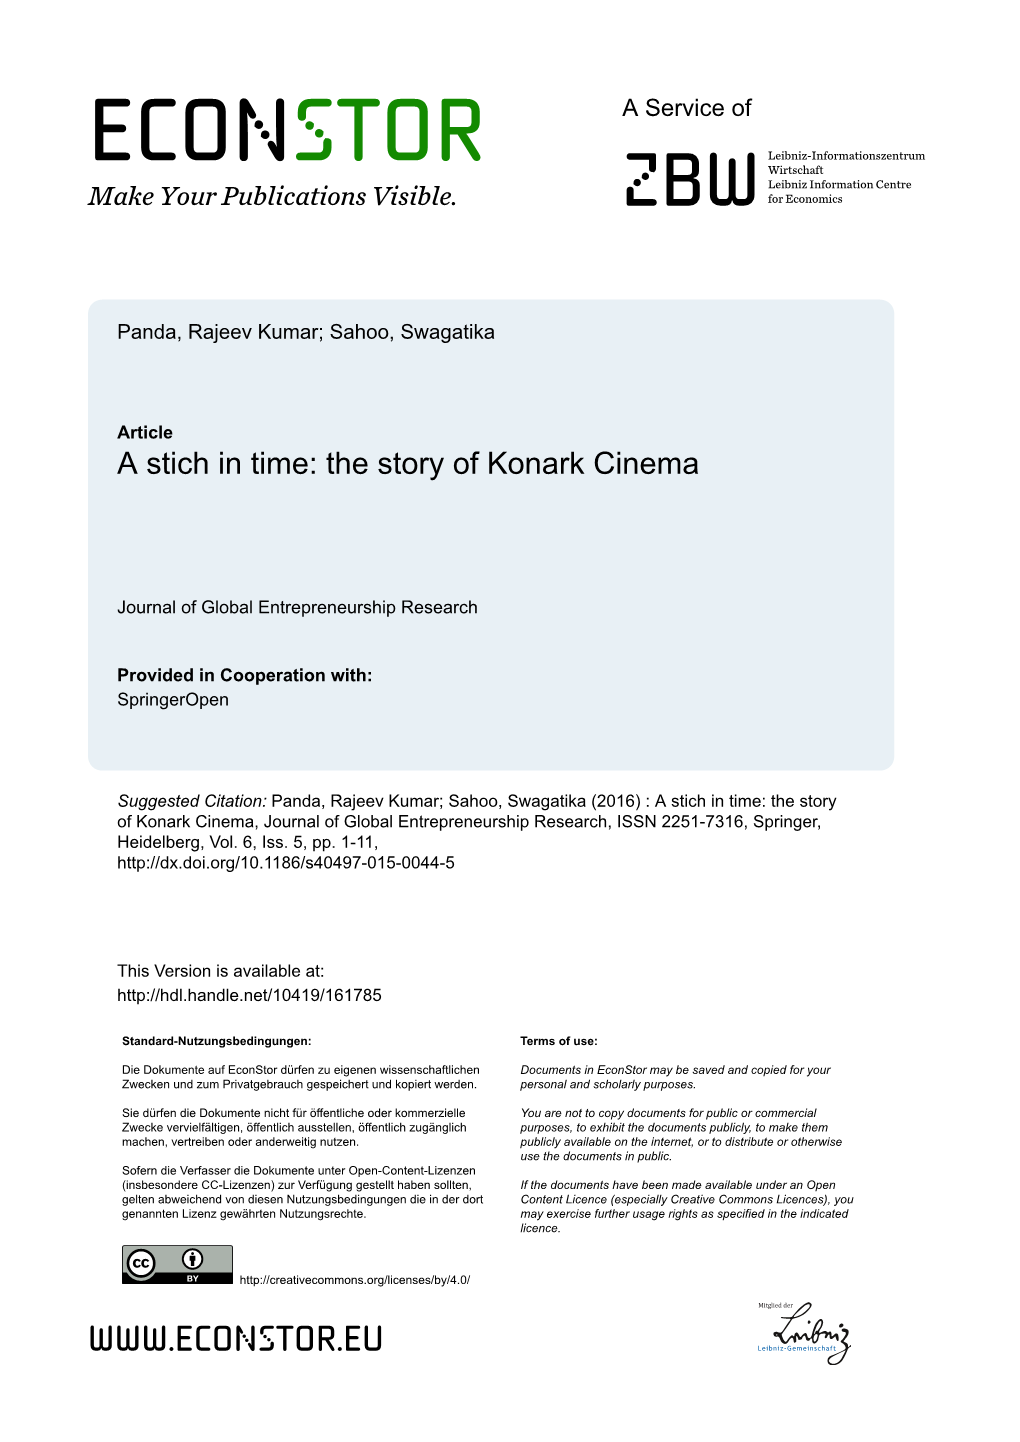 A Stich in Time: the Story of Konark Cinema